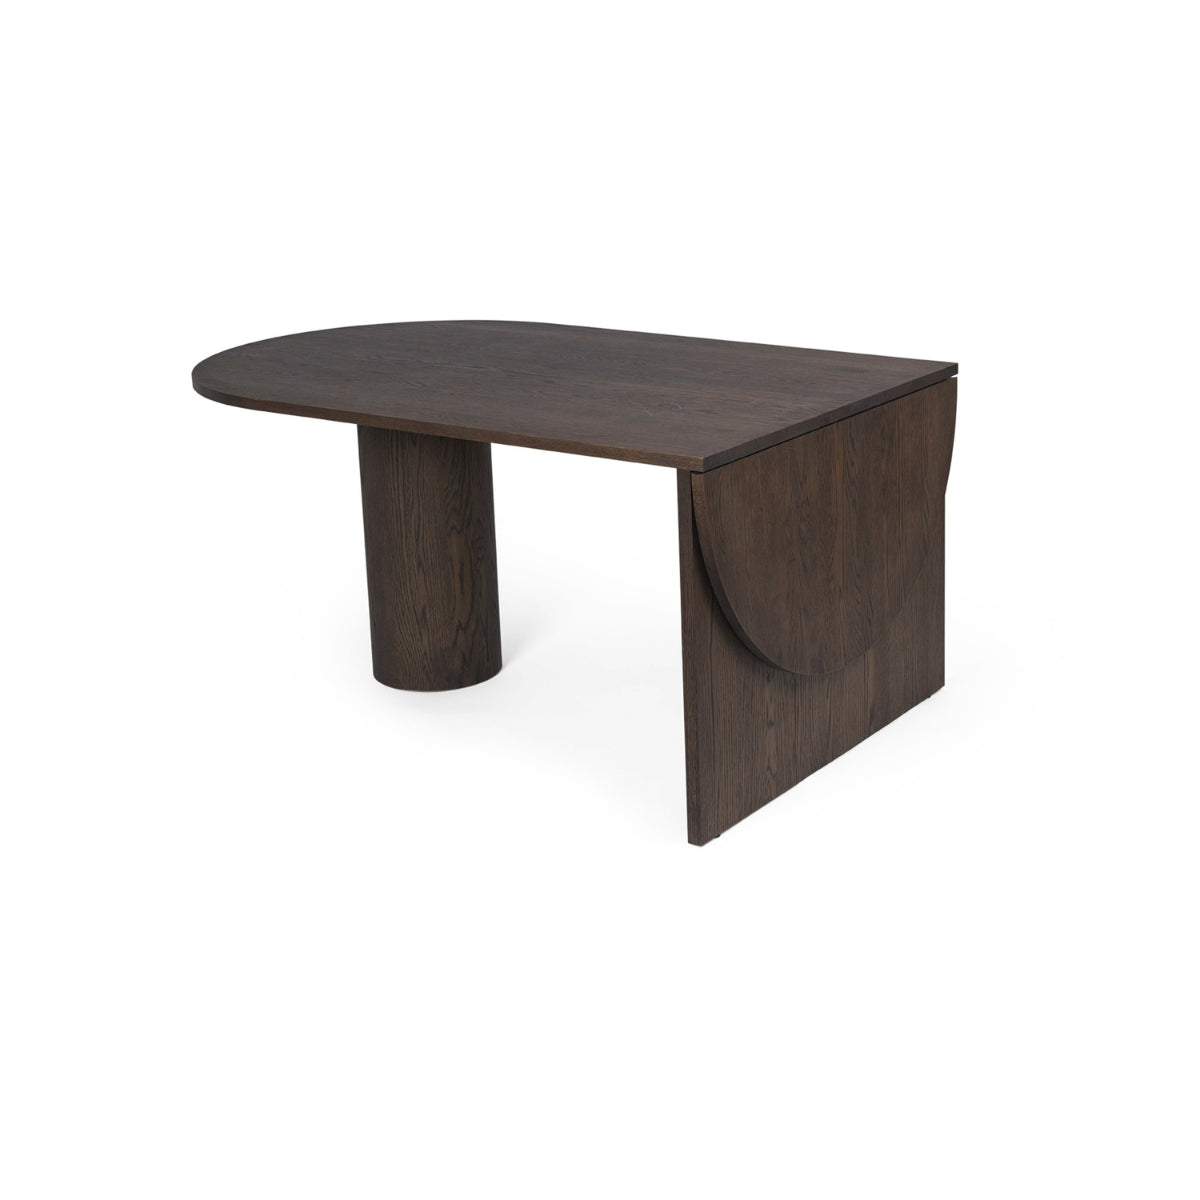 ferm LIVING Pylo Dining Table in solid oak. Free UK delivery at someday designs